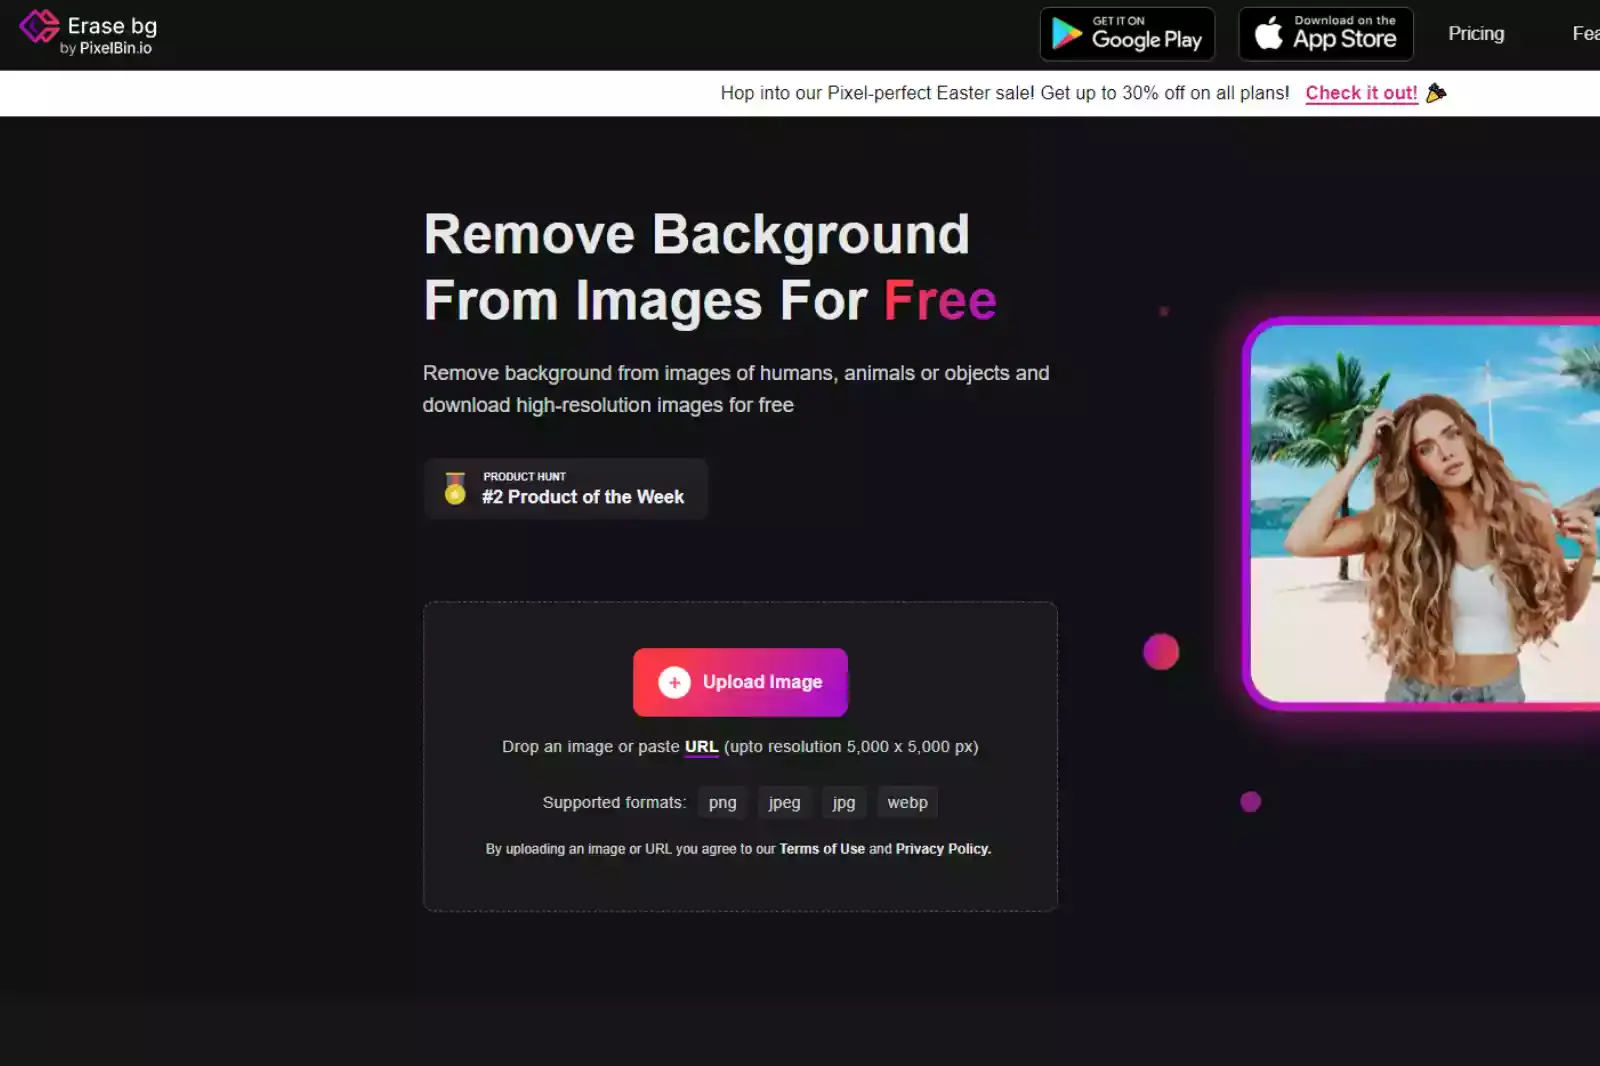 Why use Erase.bg – the Popular AI-Powered Background Removal App